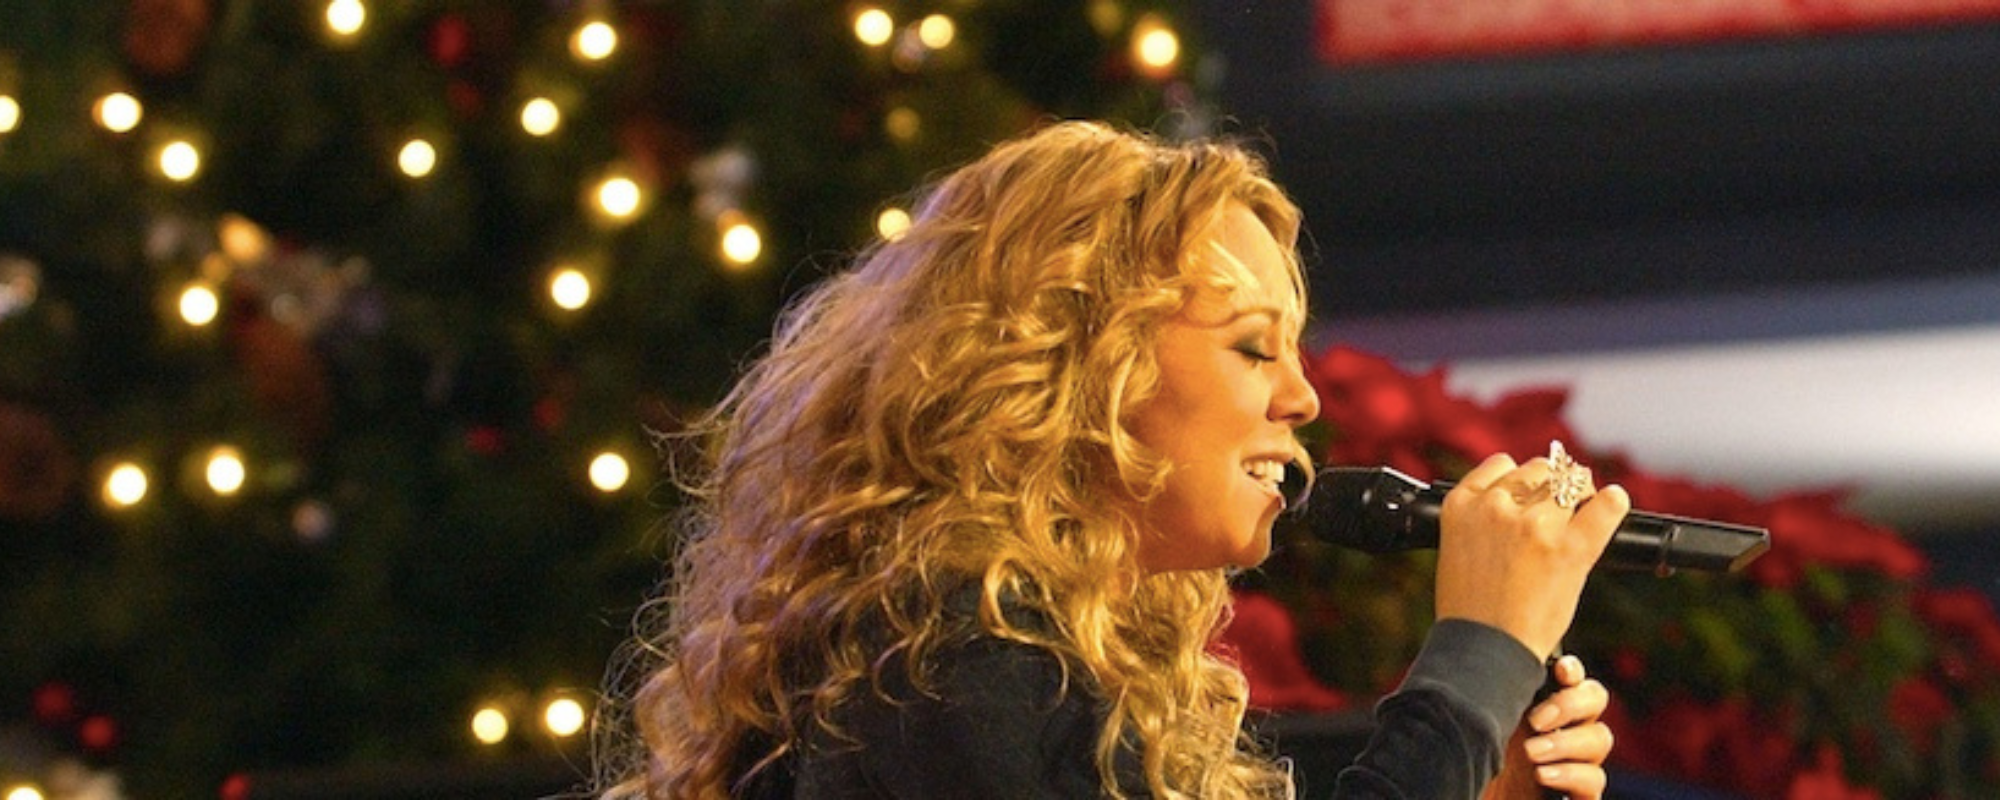 When is it Too Early to Start Listening to Christmas Music? American Songwriter Weighs In